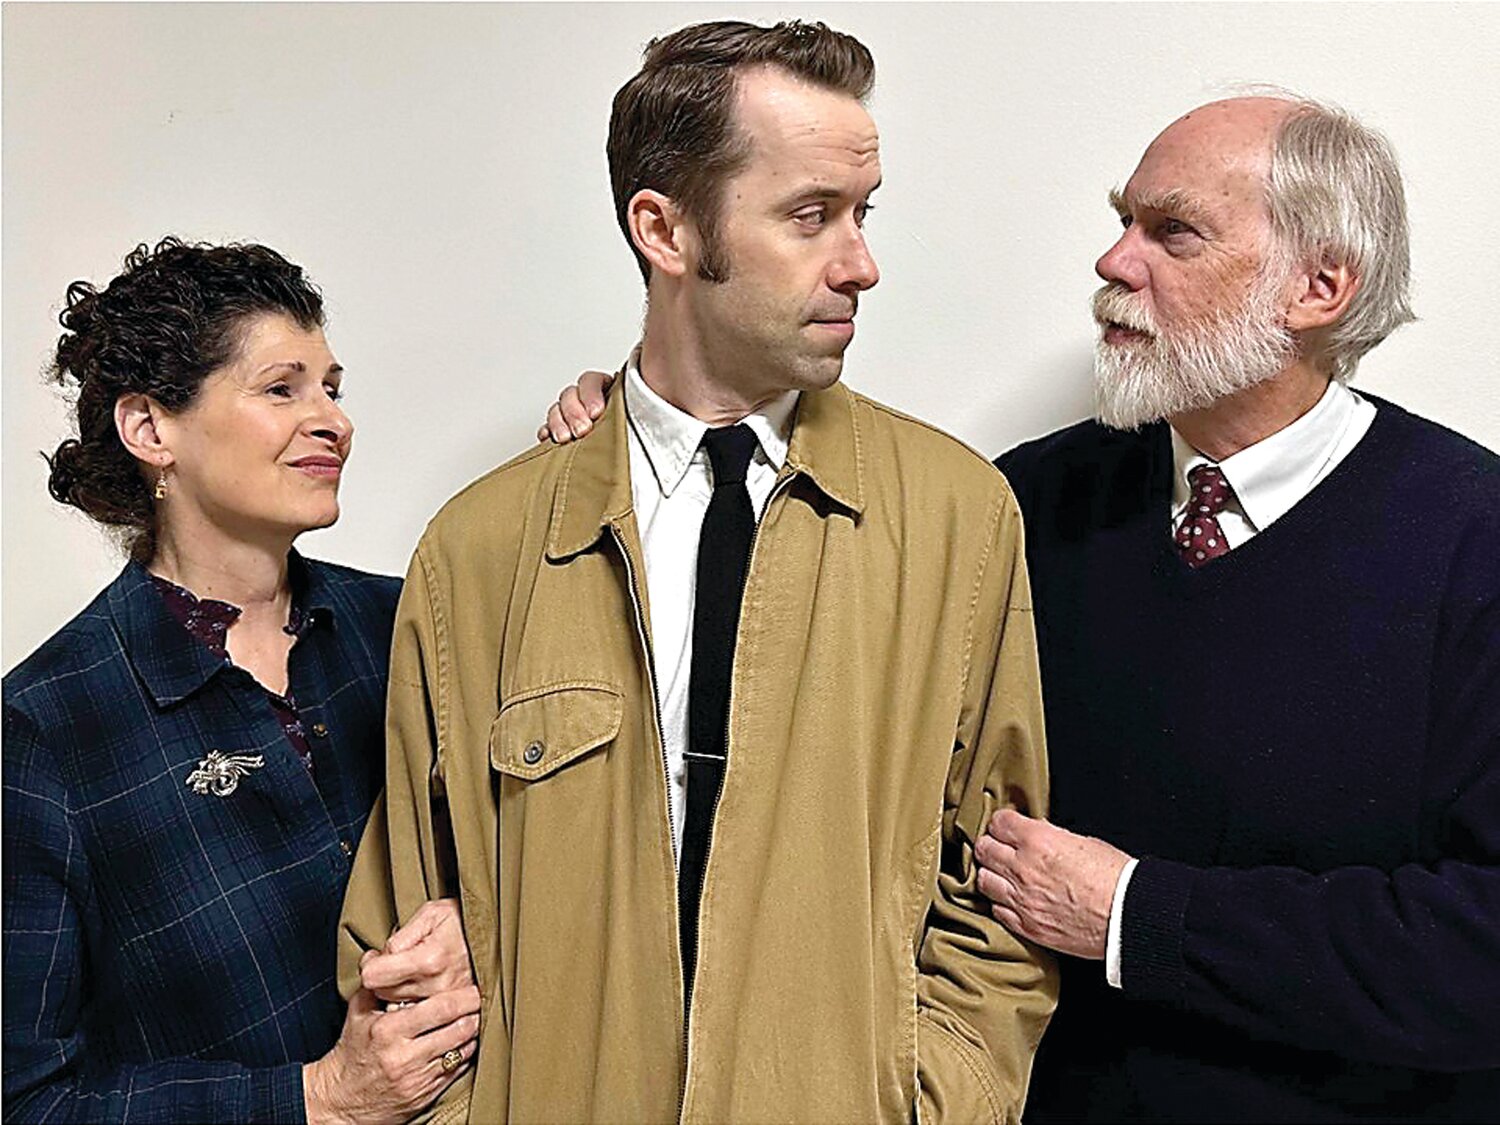 Janet Quartarone of Flemington, N.J.; Raymond Fallon of Robbinsville, N.J.; and Peter Shea Kierst of Furlong, star as Kate, Chris, and Joe Keller for the performance of Arthur Miller’s “All My Sons,” at Mercer County Community College’s Kelsey Theatre Jan. 26-Feb. 4.